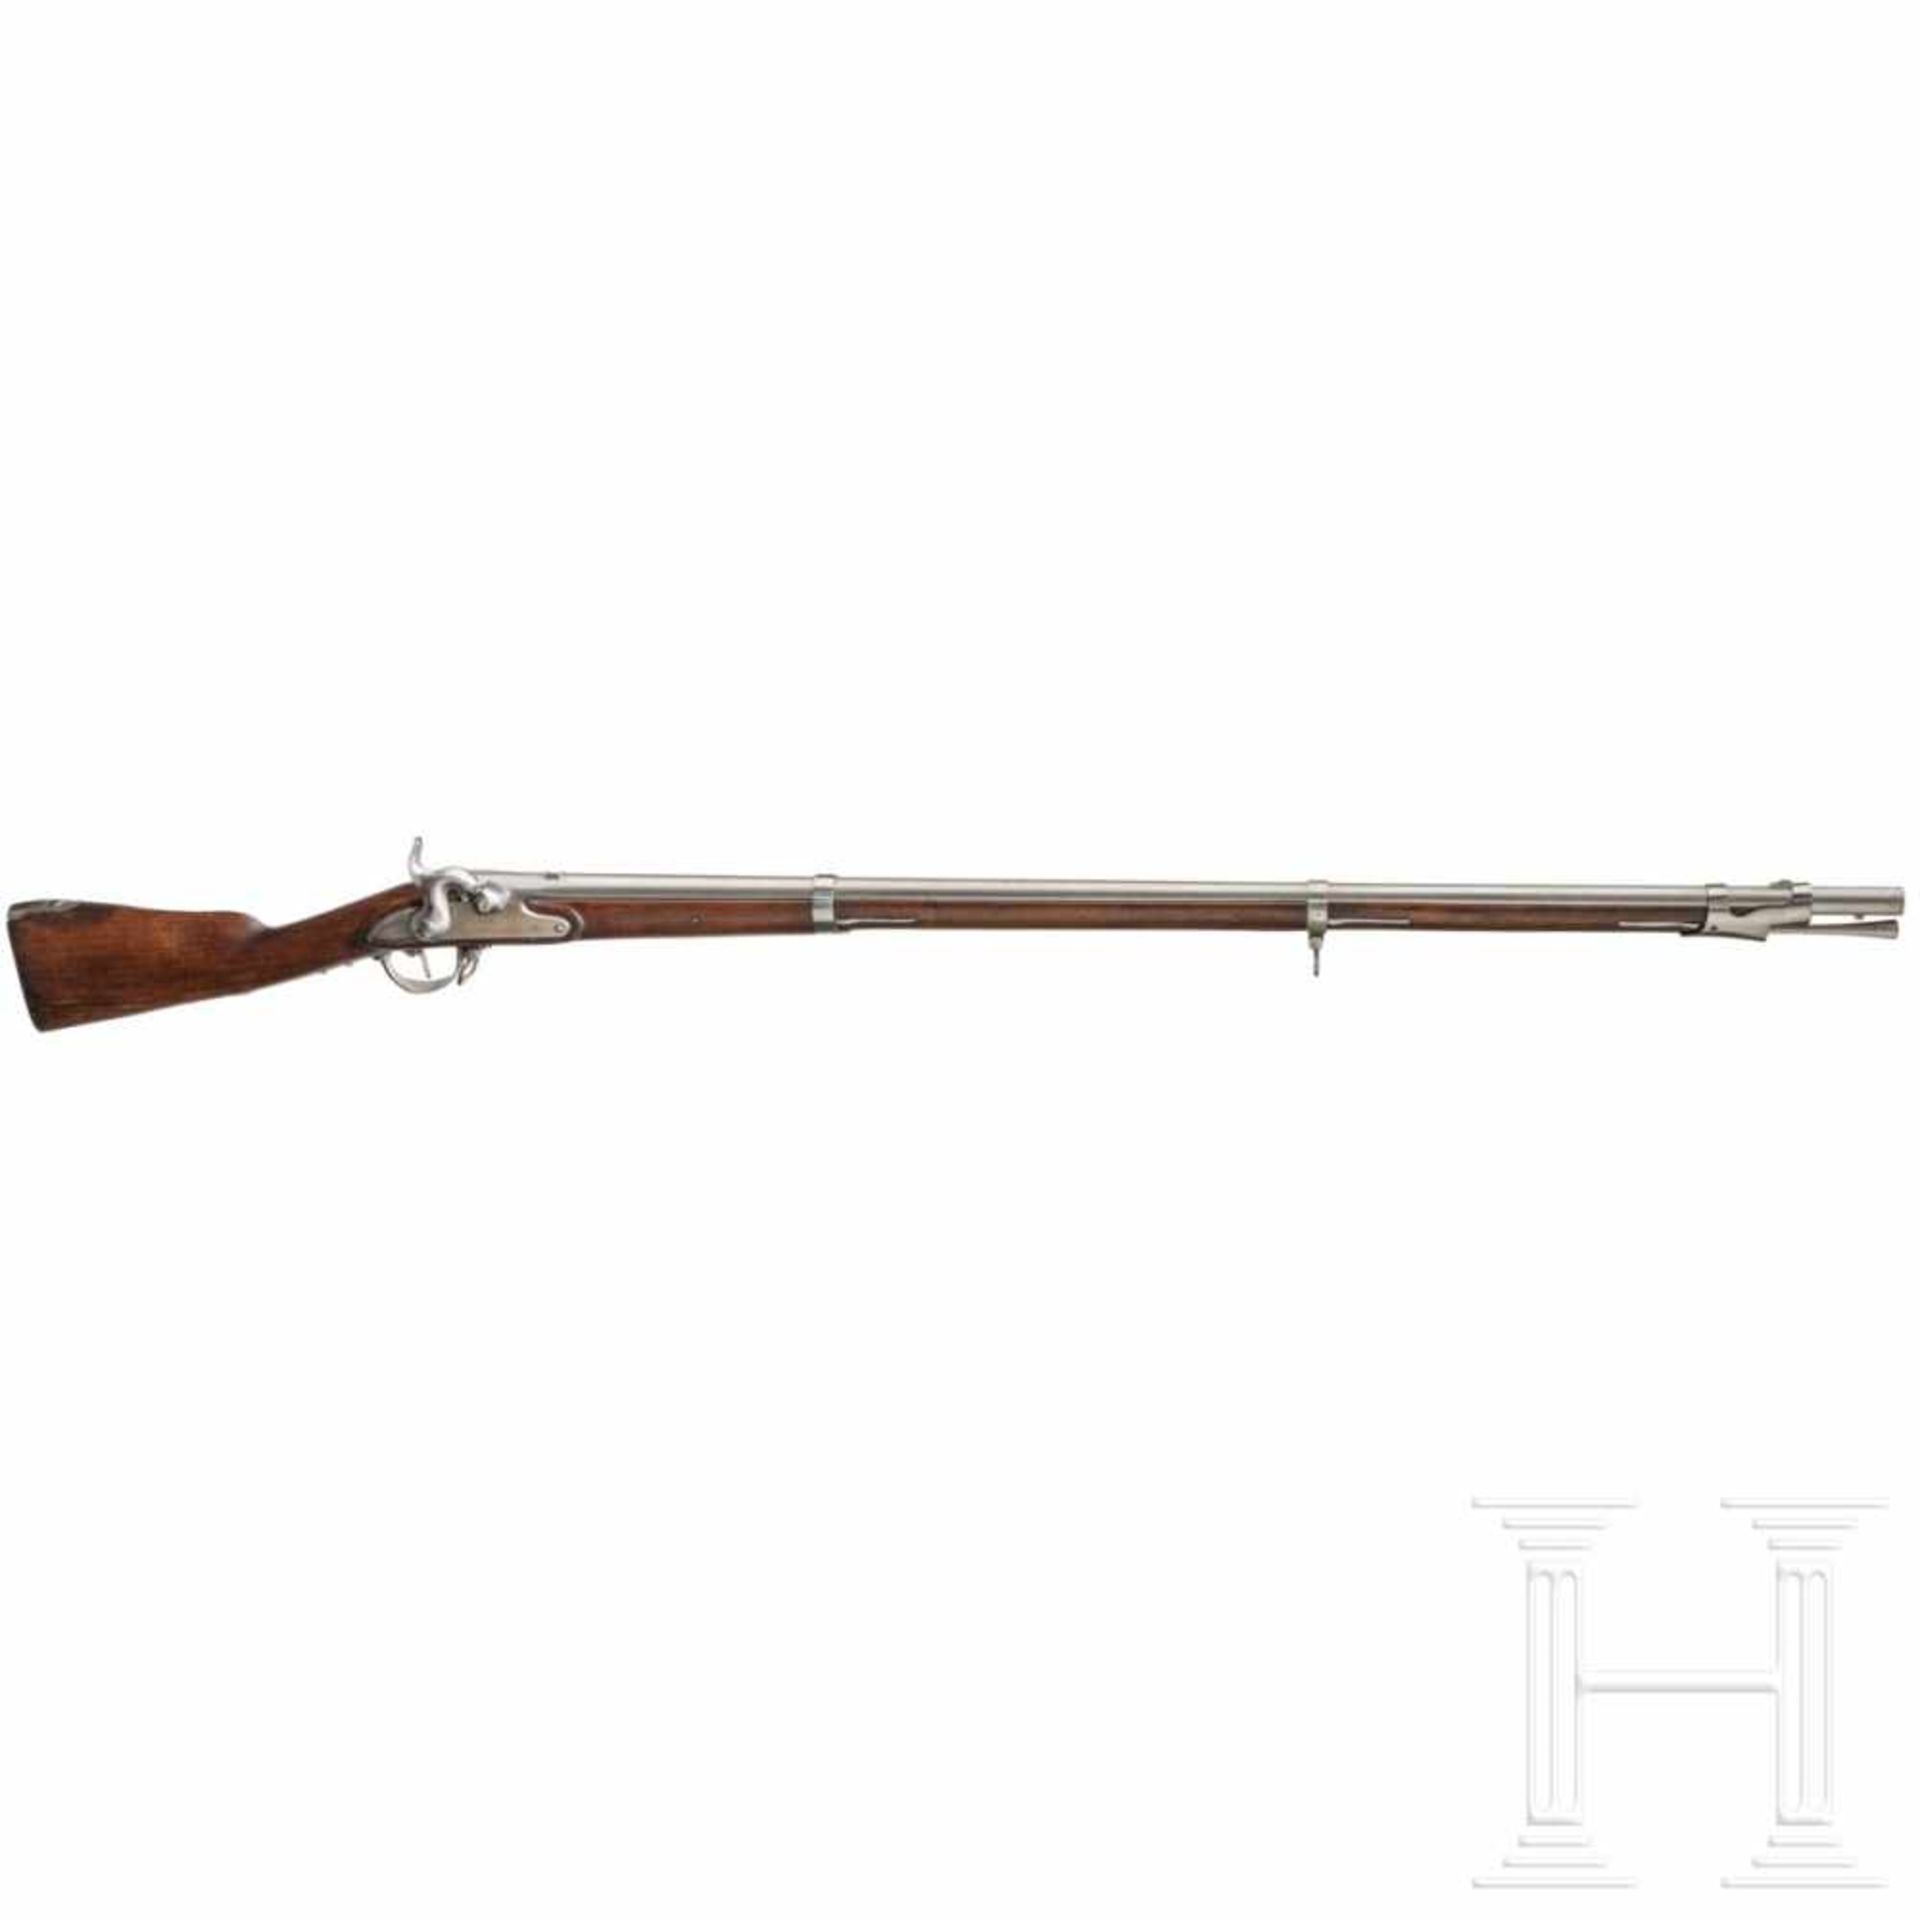 A model 1816/44 U/M infantry rifleSmooth-bore barrel in calibre 17.5 mm, iron front sight and